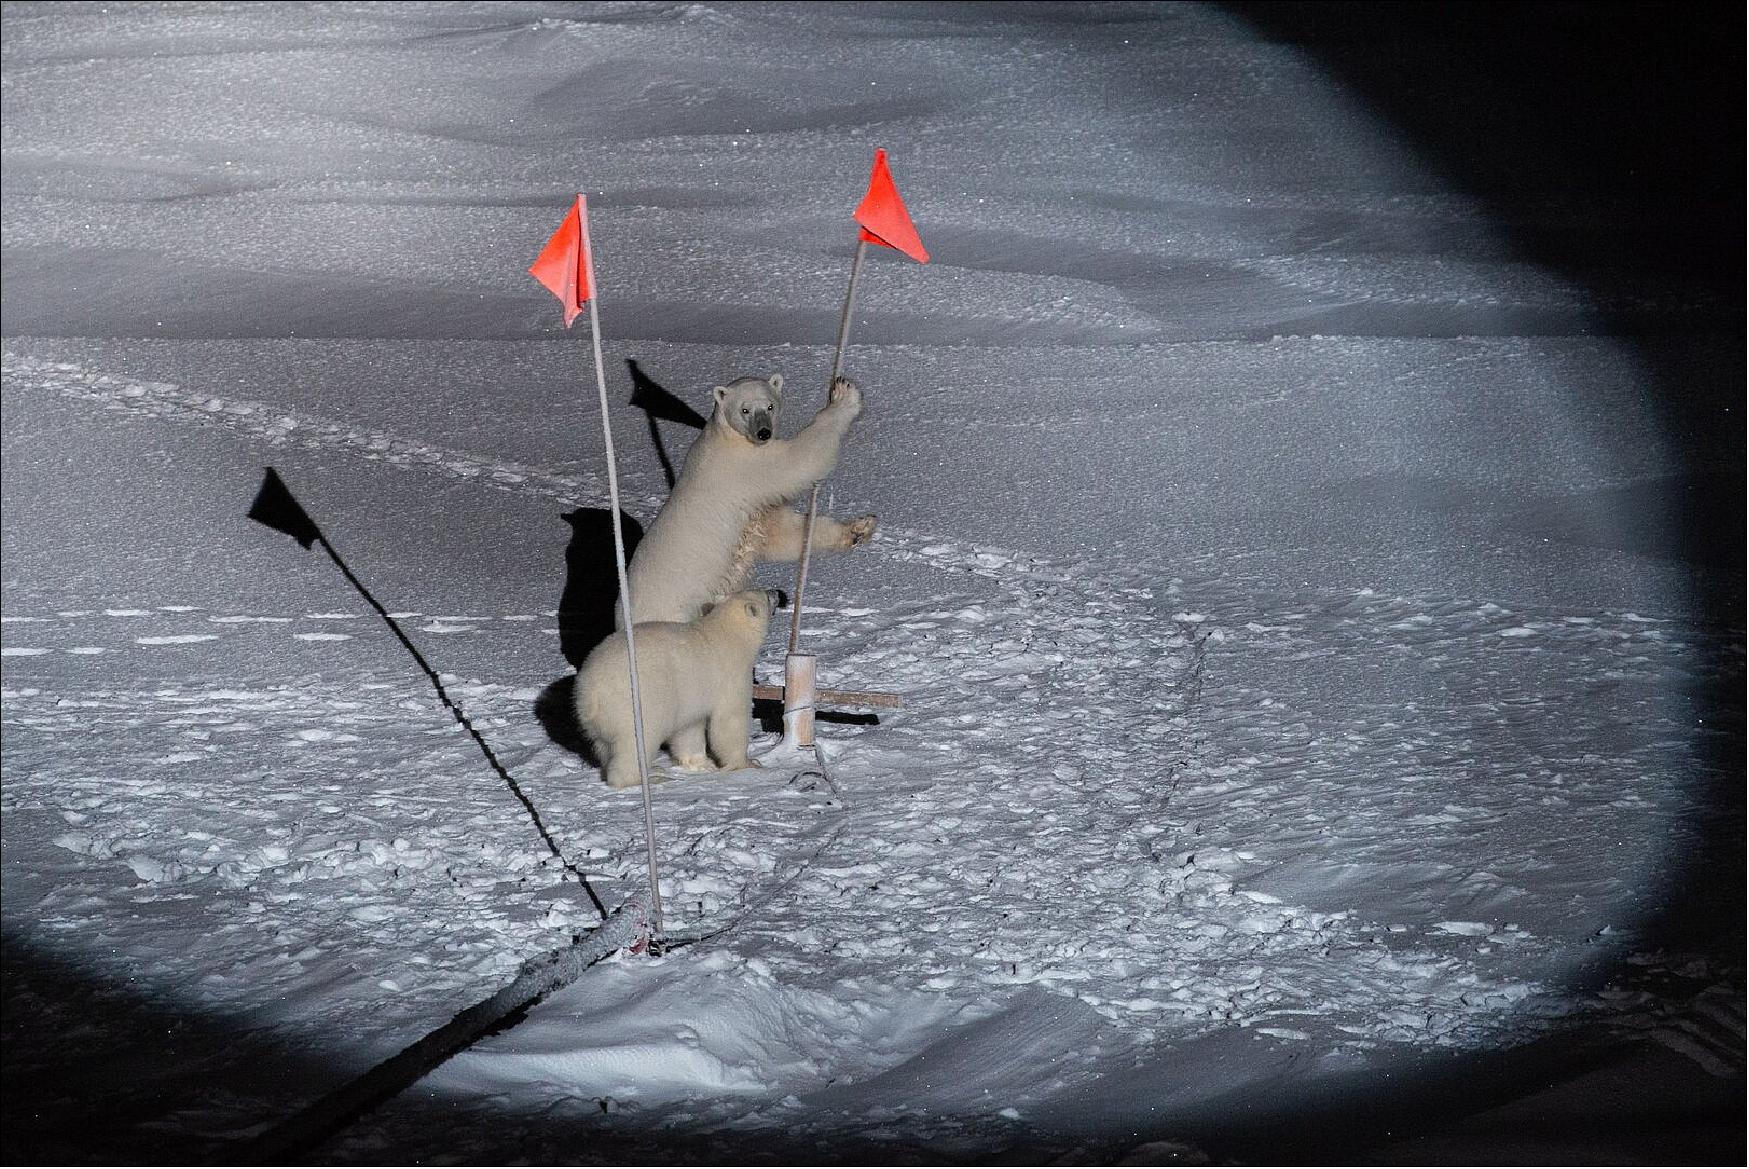 Figure 50: The researchers participating in the MOSAiC expedition not only have to keep an eye on the ever-changing sea ice, but also on visitors. These polar bears seem to be enjoying playing with the marker flags. Spearheaded by AWI, MOSAiC is the biggest shipborne polar expedition of all time. It involves the Polarstern German research icebreaker spending a year trapped and drifting in the sea ice so that scientists from around the world can study the Arctic as the epicenter of global warming and gain fundamental insights that are key to better understand global climate change (image credit: AWI, Esther Horvath, CC BY-SA 3.0 IGO)